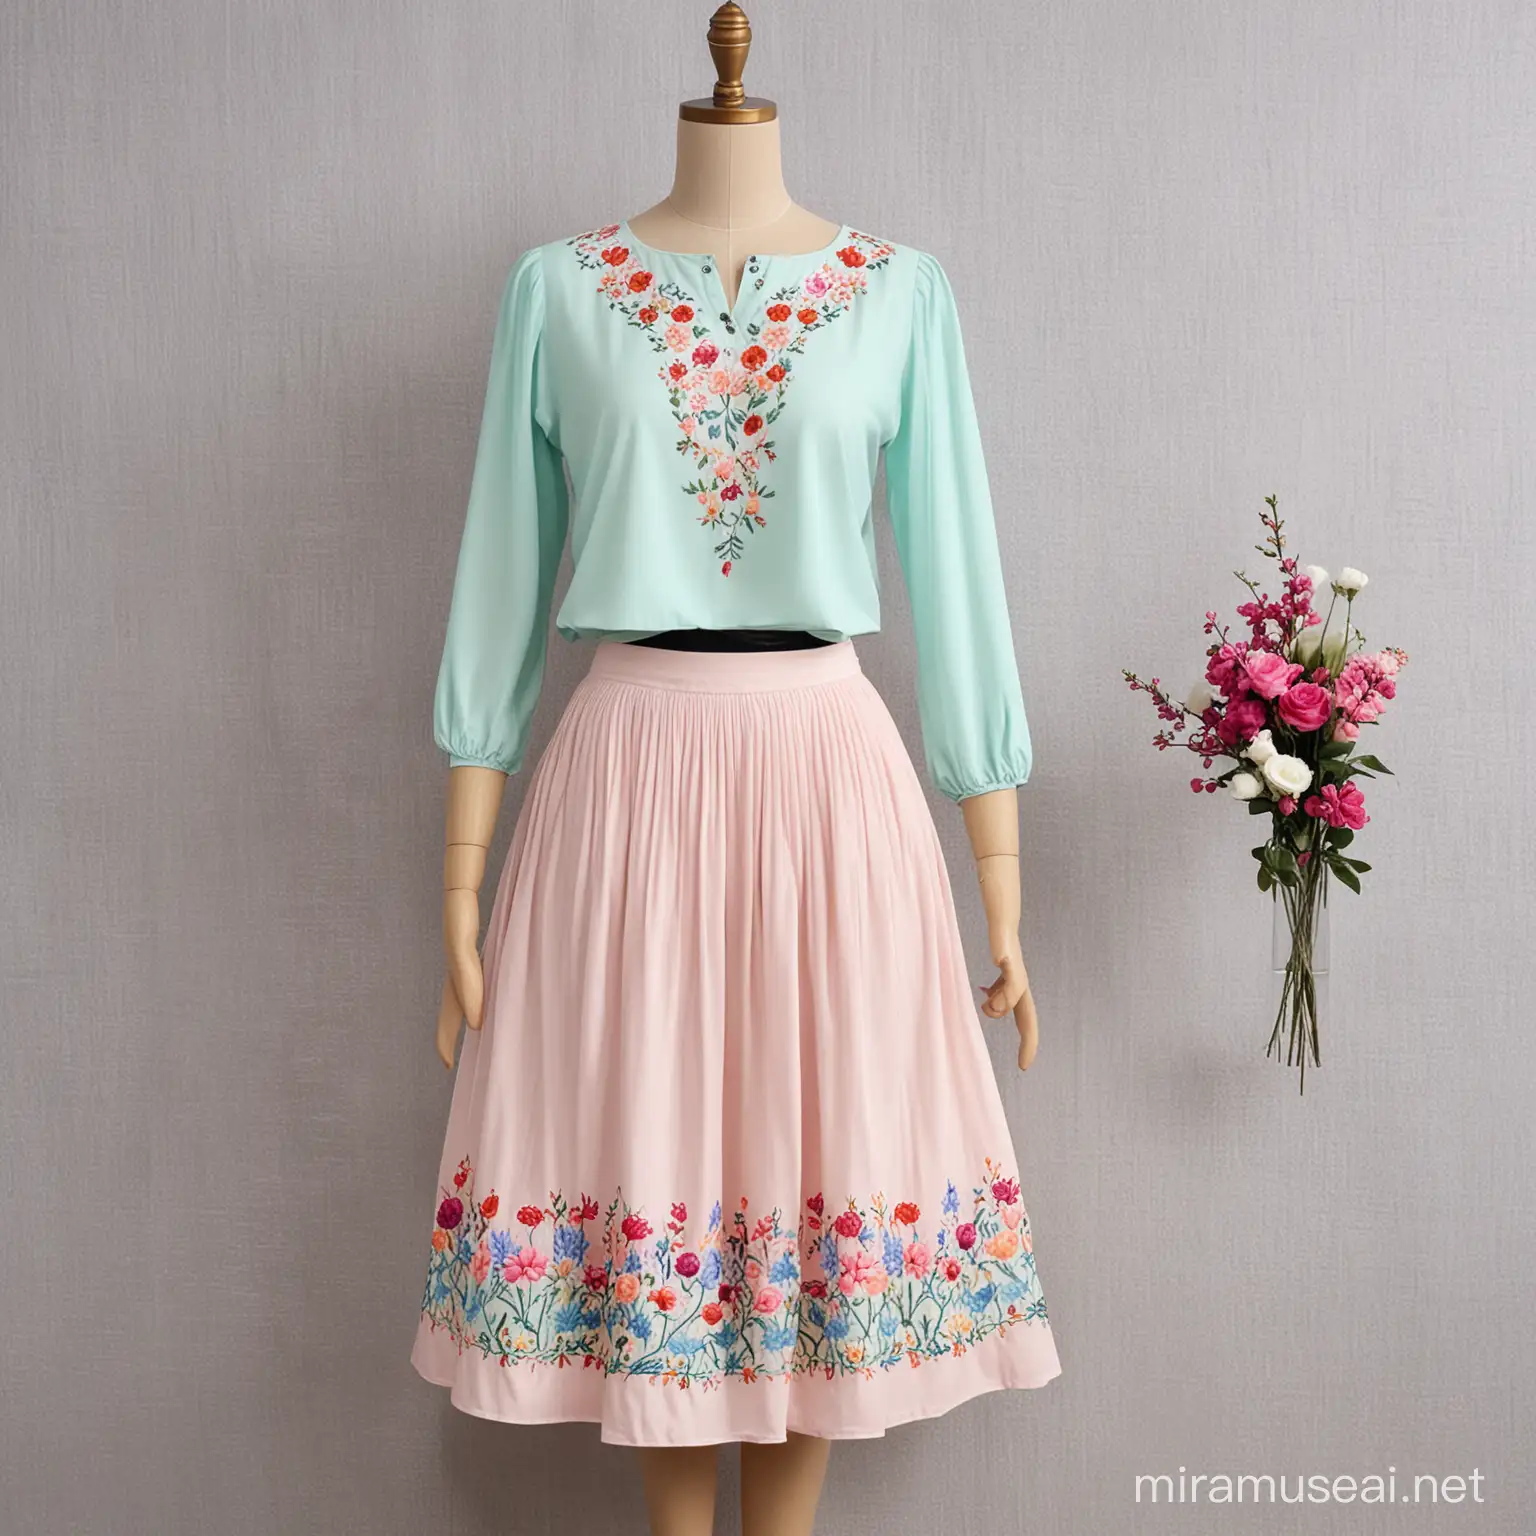 Elegant PastelColored Womens Skirt and Top with Exquisite Embroidery Design